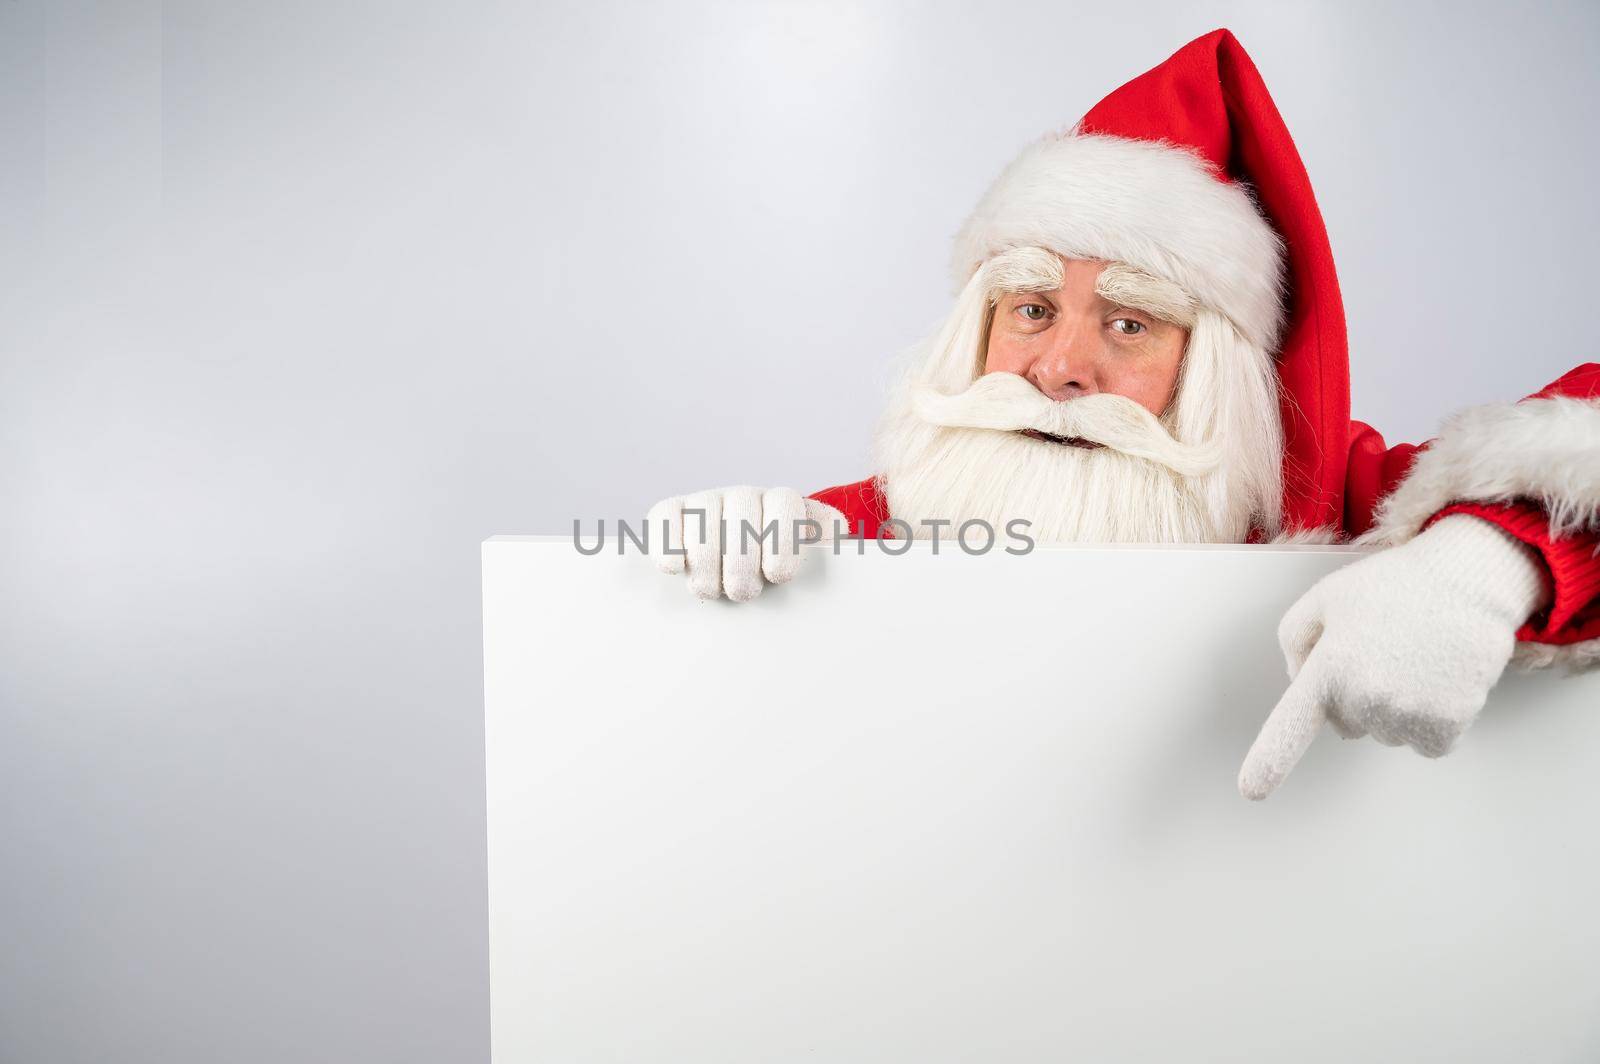 Santa Claus points to an empty white space. Promotional offer for Christmas